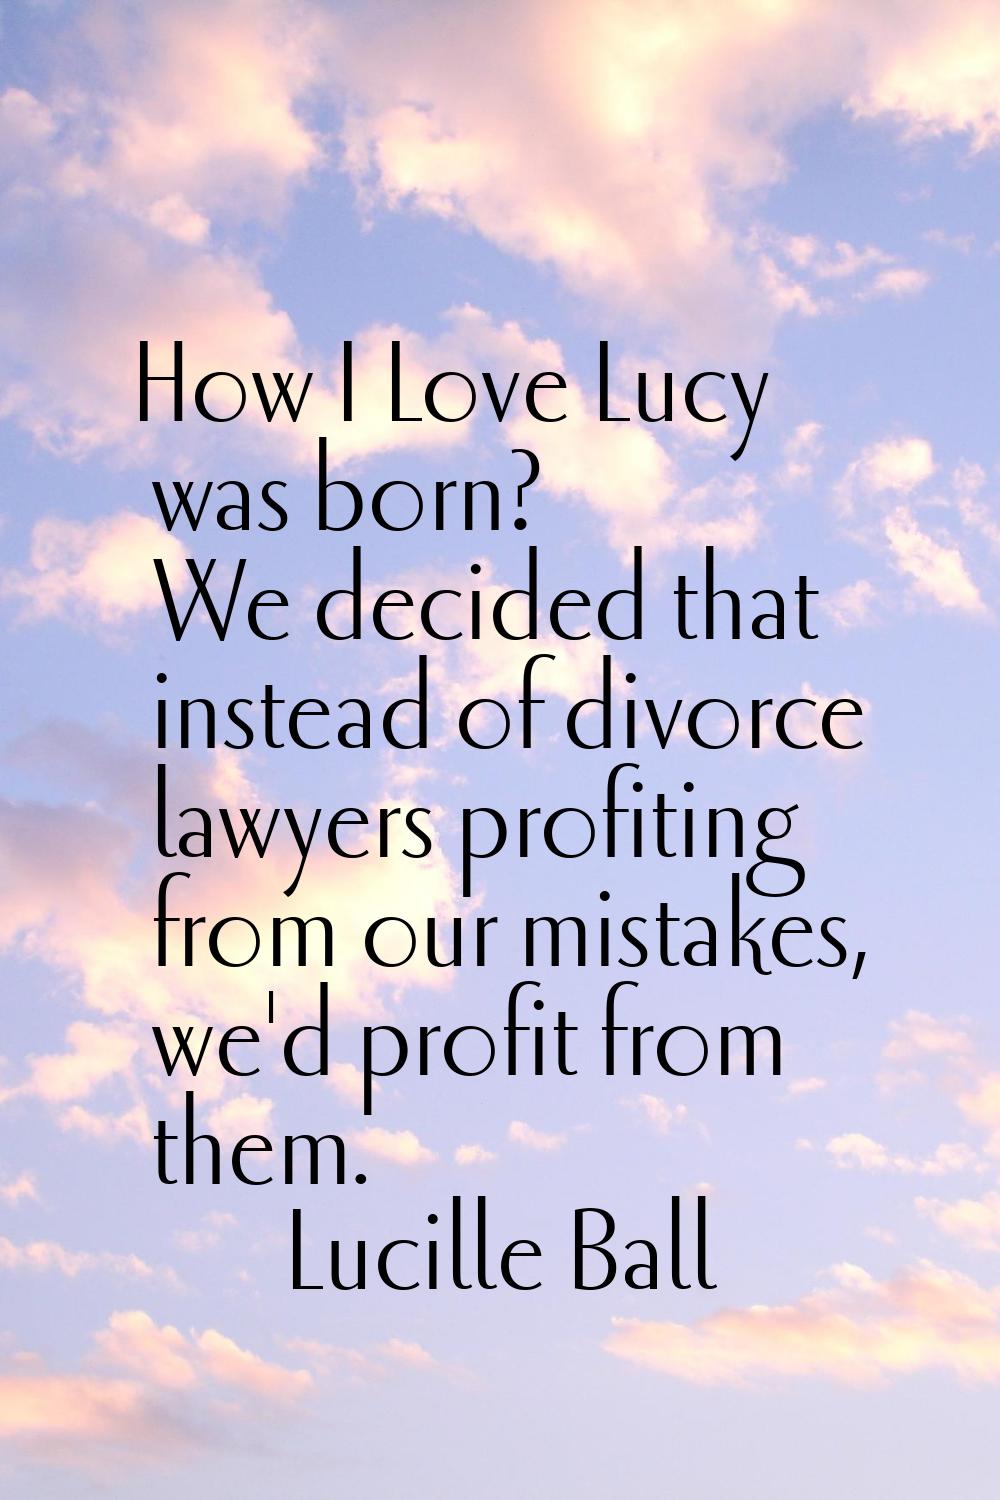 How I Love Lucy was born? We decided that instead of divorce lawyers profiting from our mistakes, w